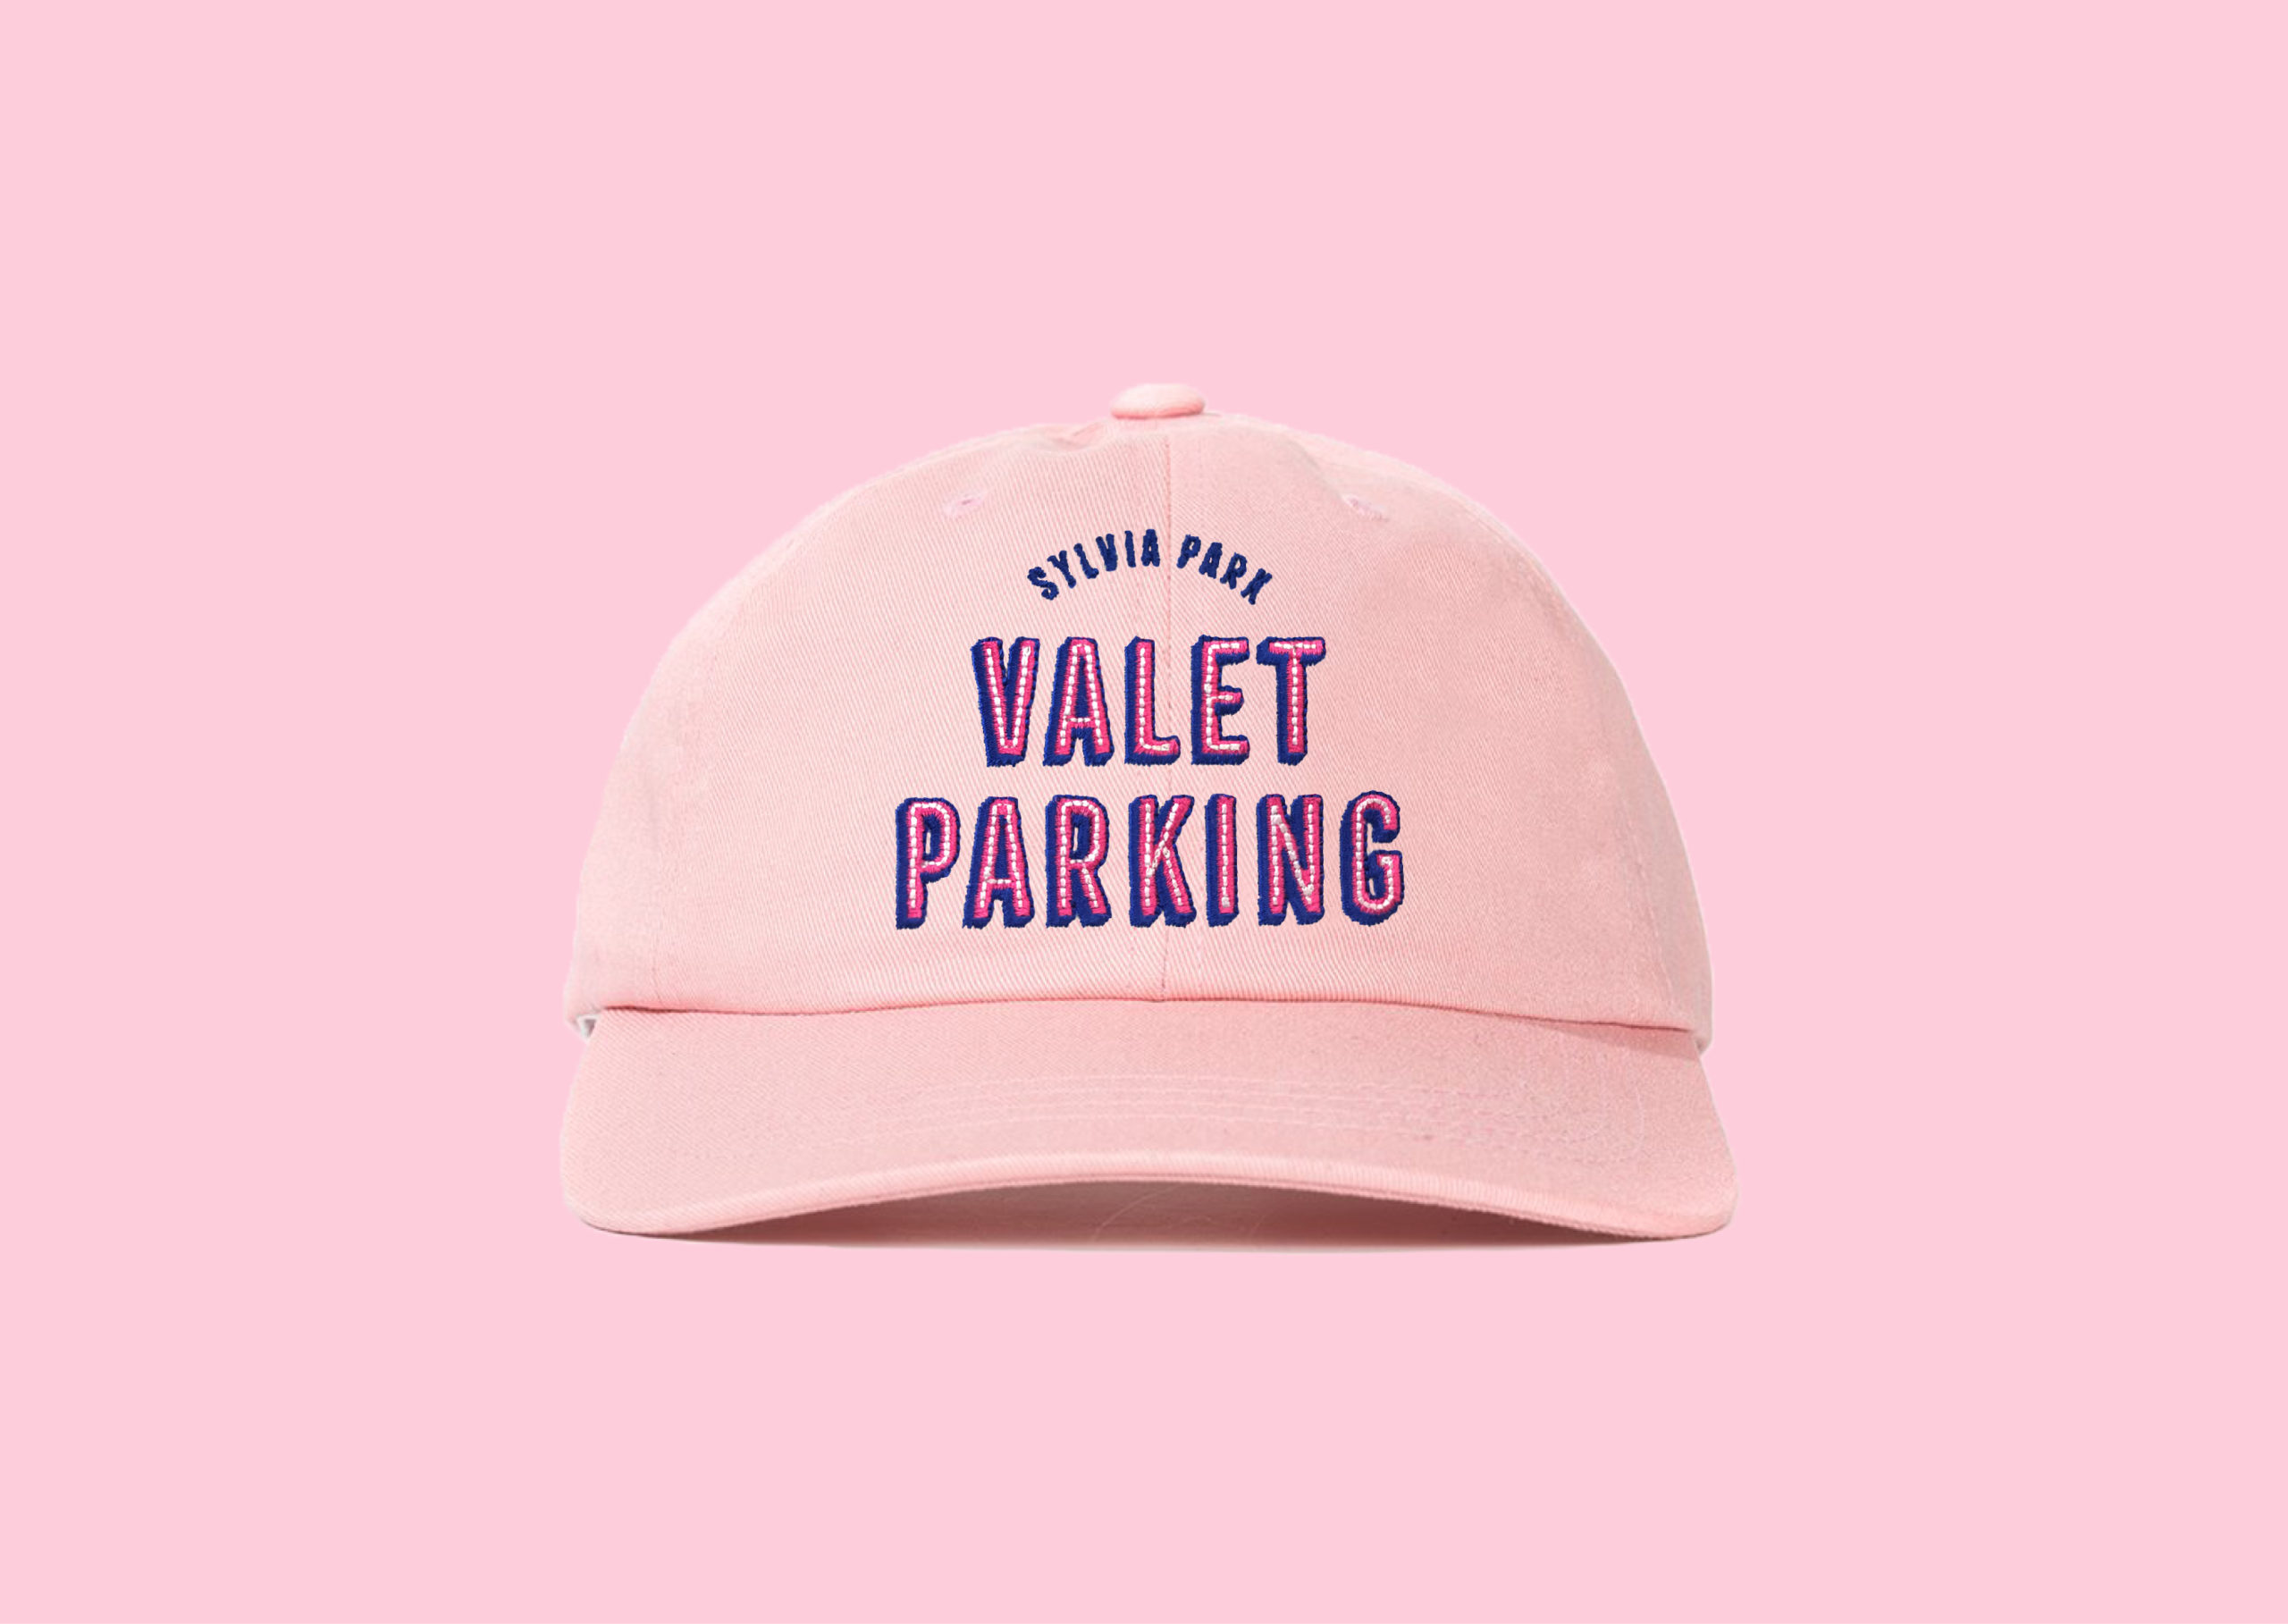 Sylvia Park Valet Parking Experience embroidered attendant cap